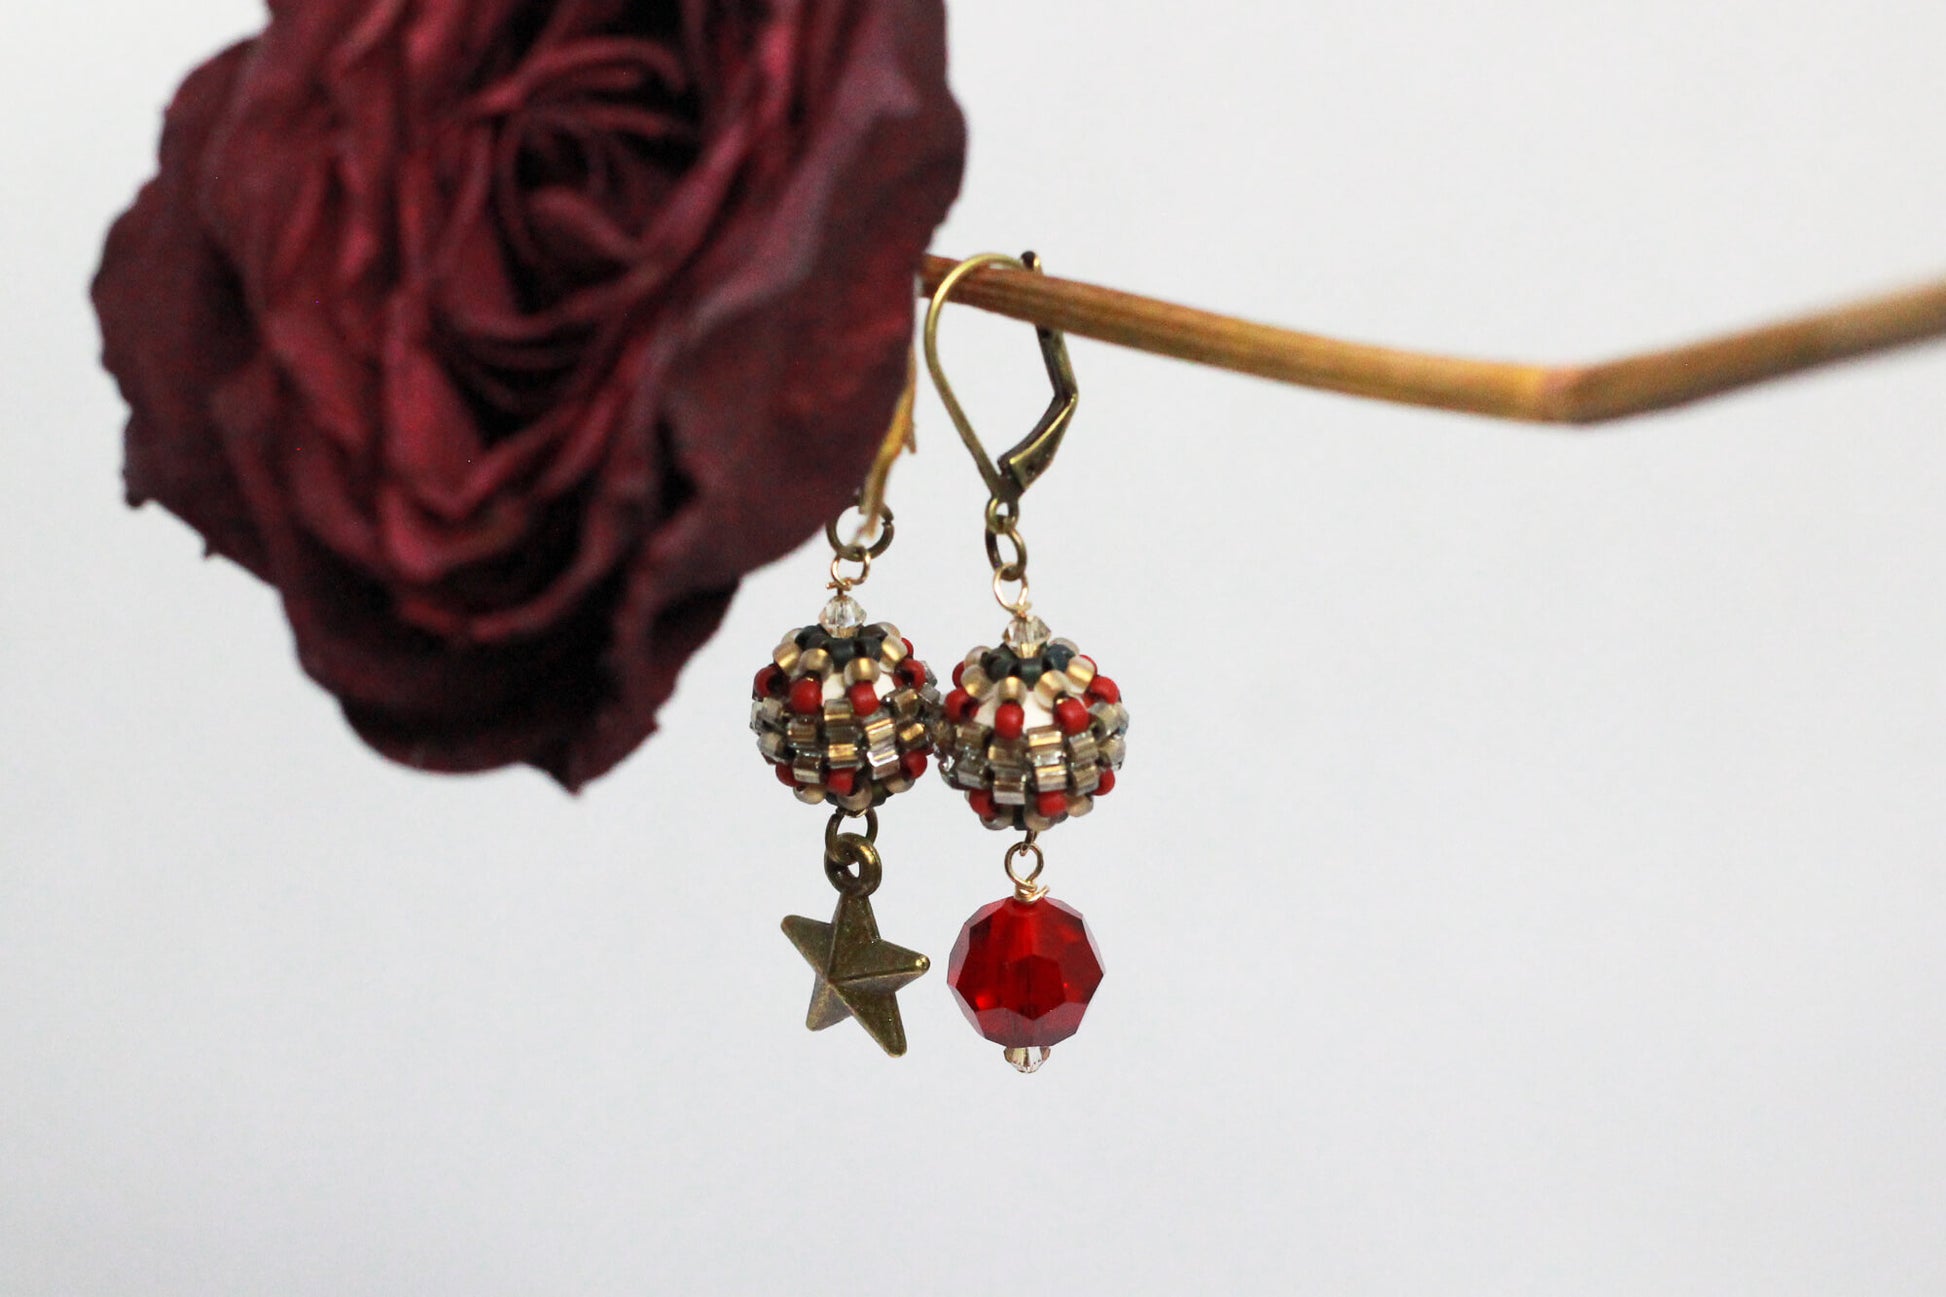 Mismatched Crystal & Brass Star Dangle Earrings Inspired by 1940s Fashion